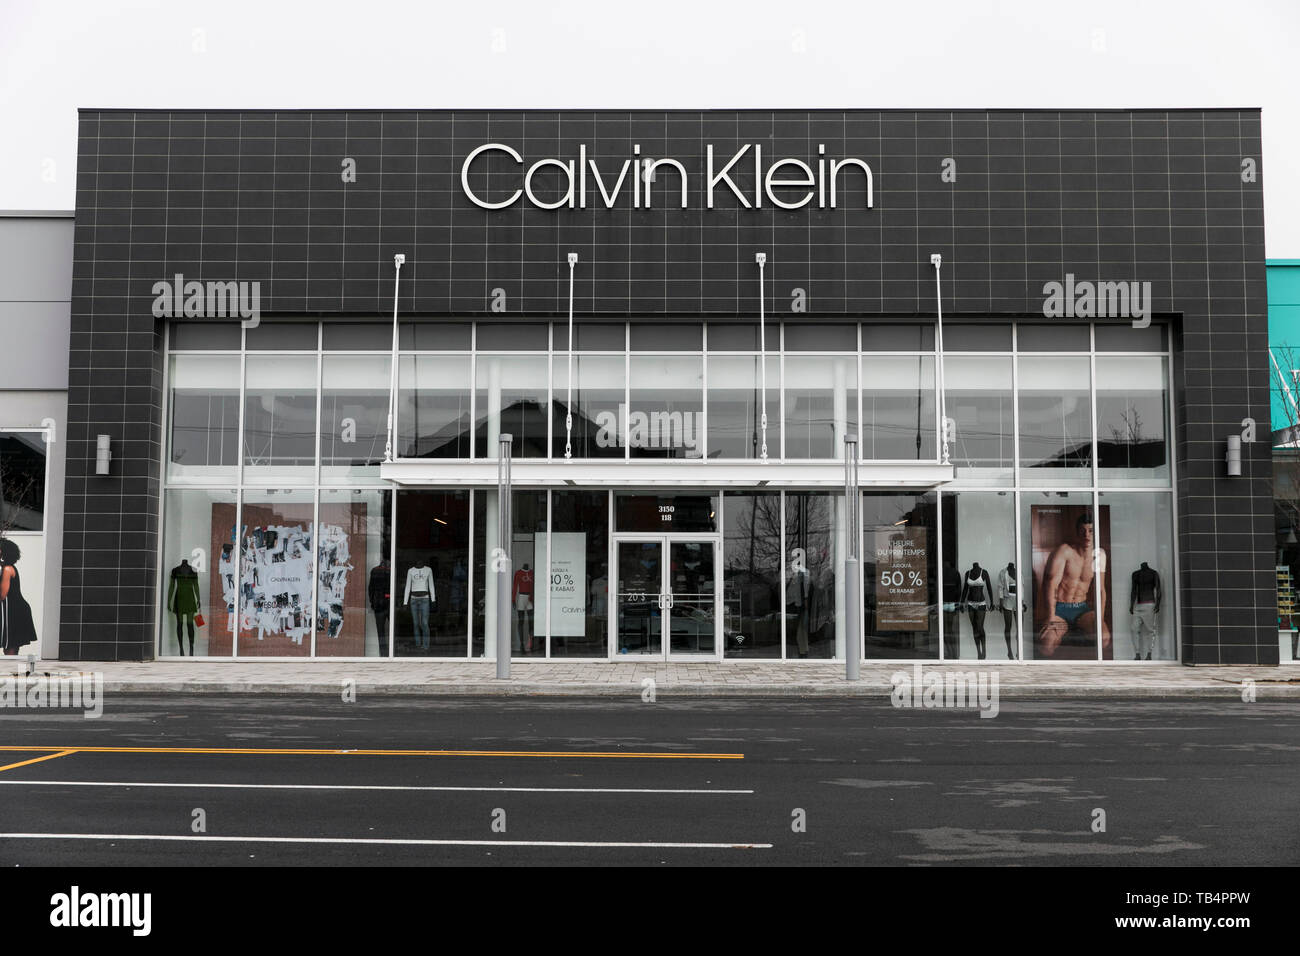 Calvin Klein Store High Resolution Stock Photography and Images - Alamy